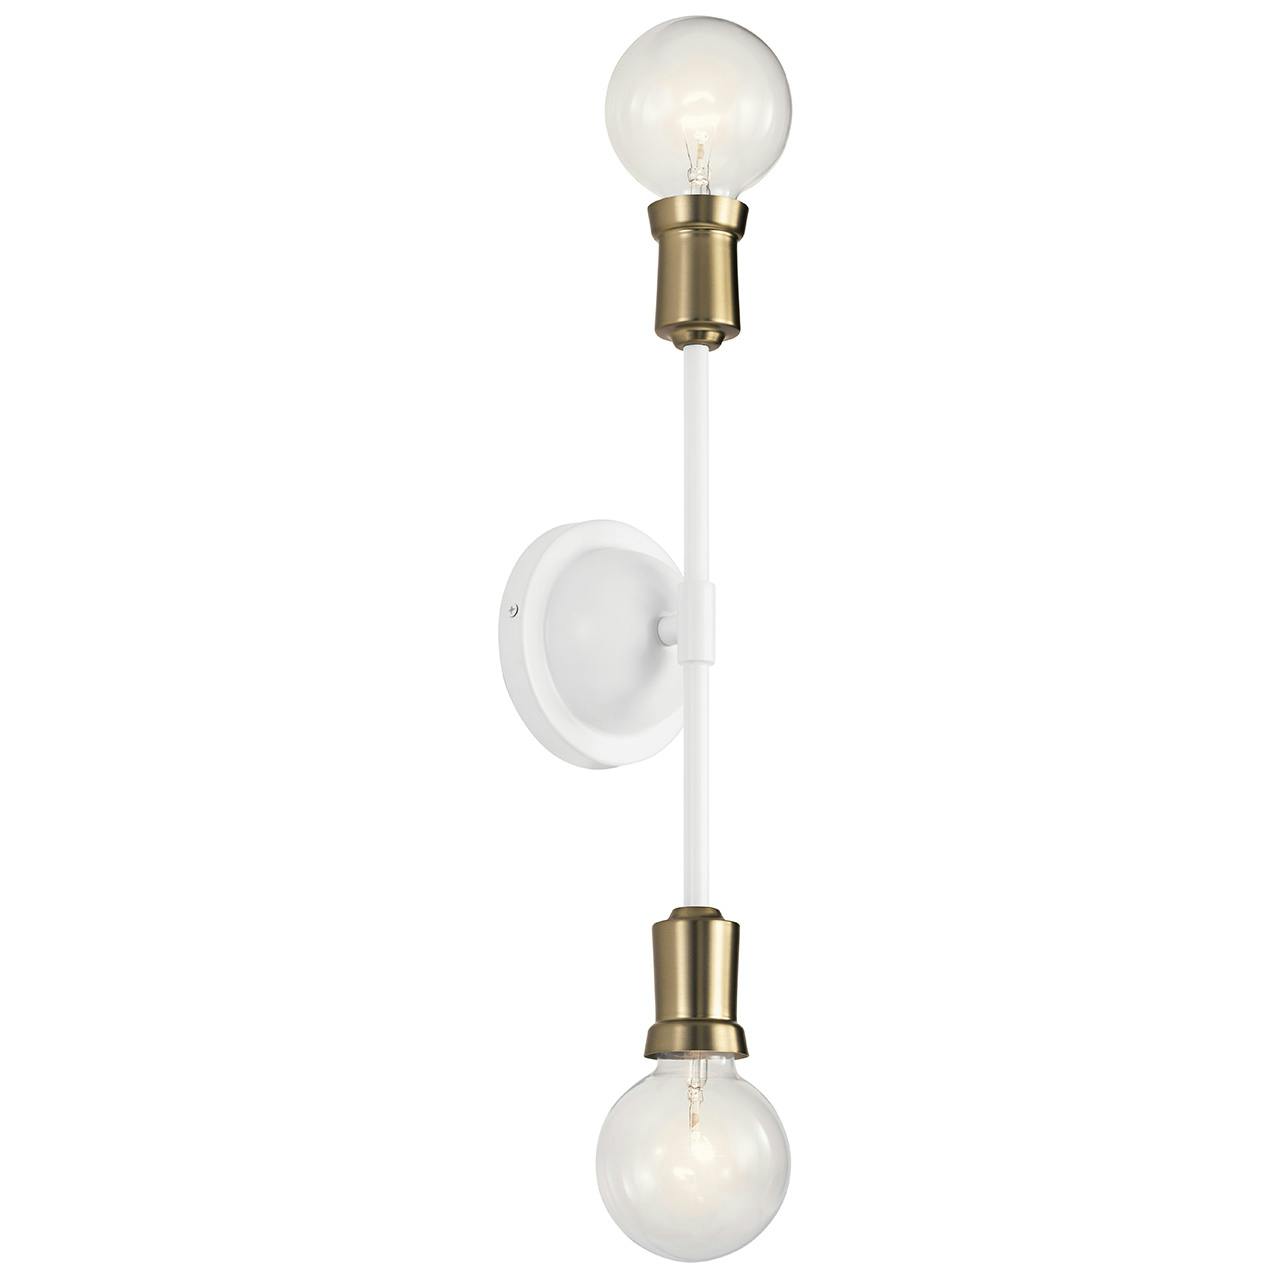 Armstrong Wall Sconce White Finish on a white background